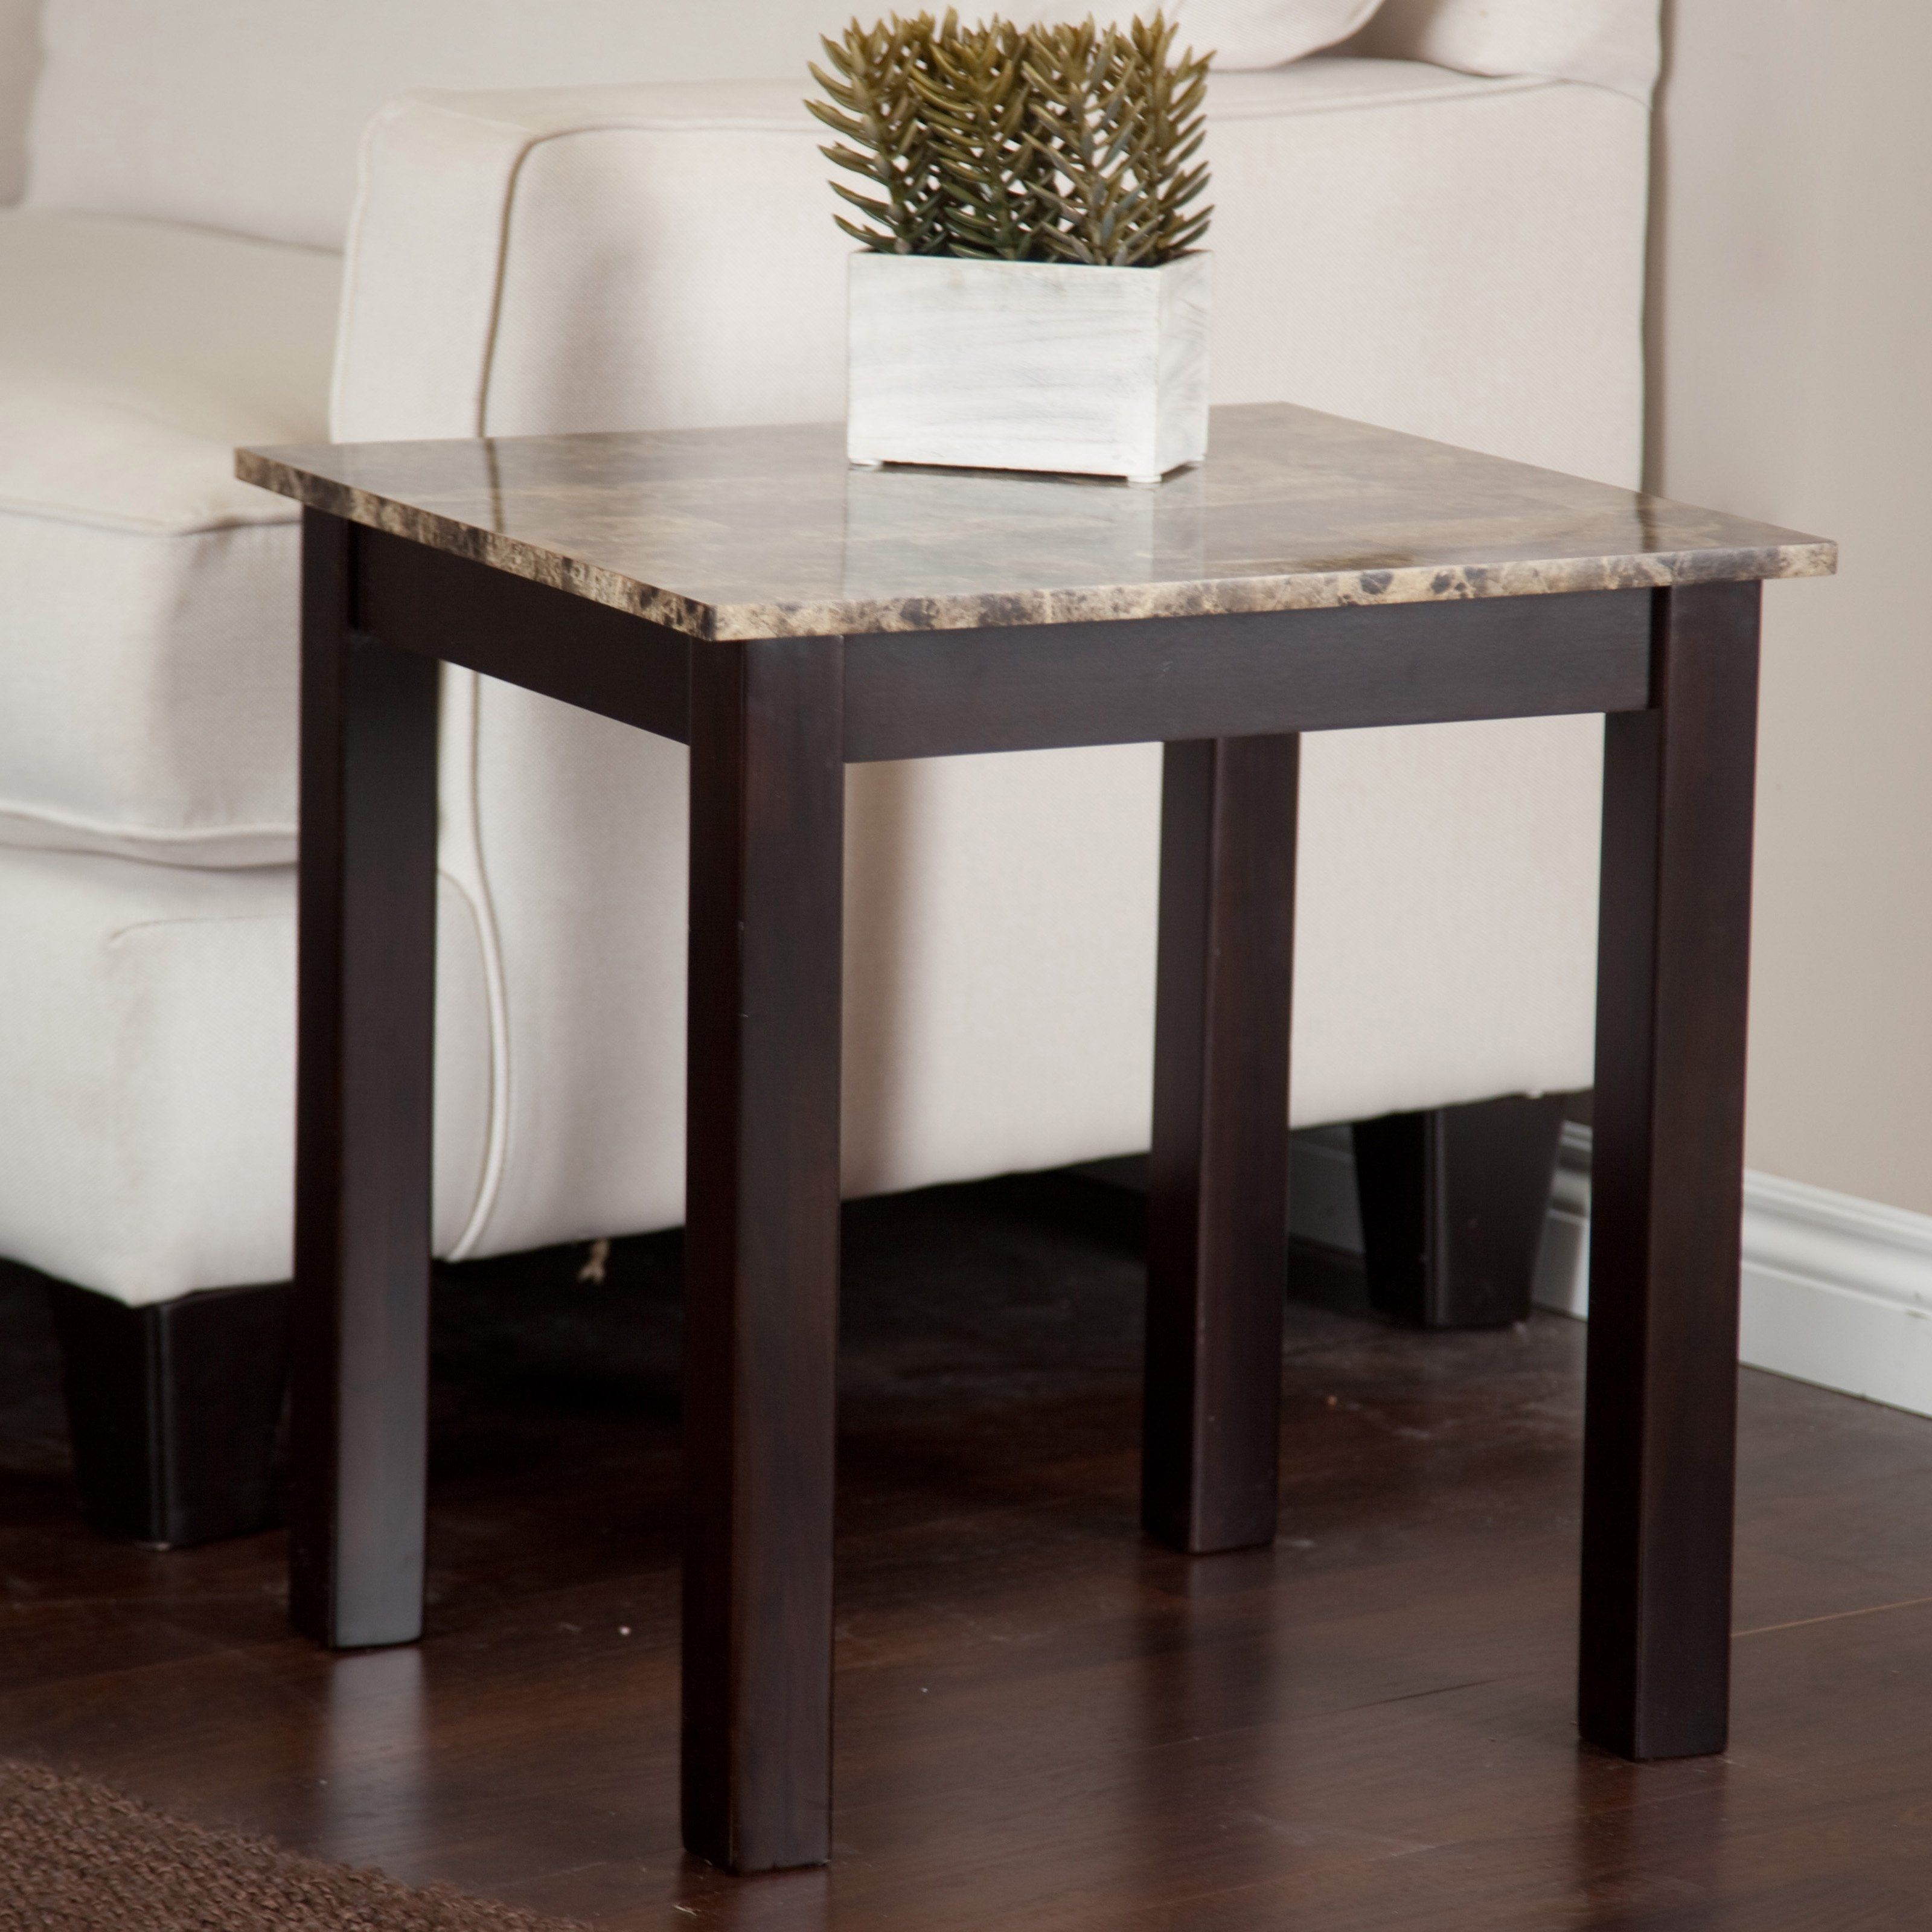 Palazzo Faux Marble End Table | Hayneedle Within Jackson Marble Side Tables (View 25 of 30)